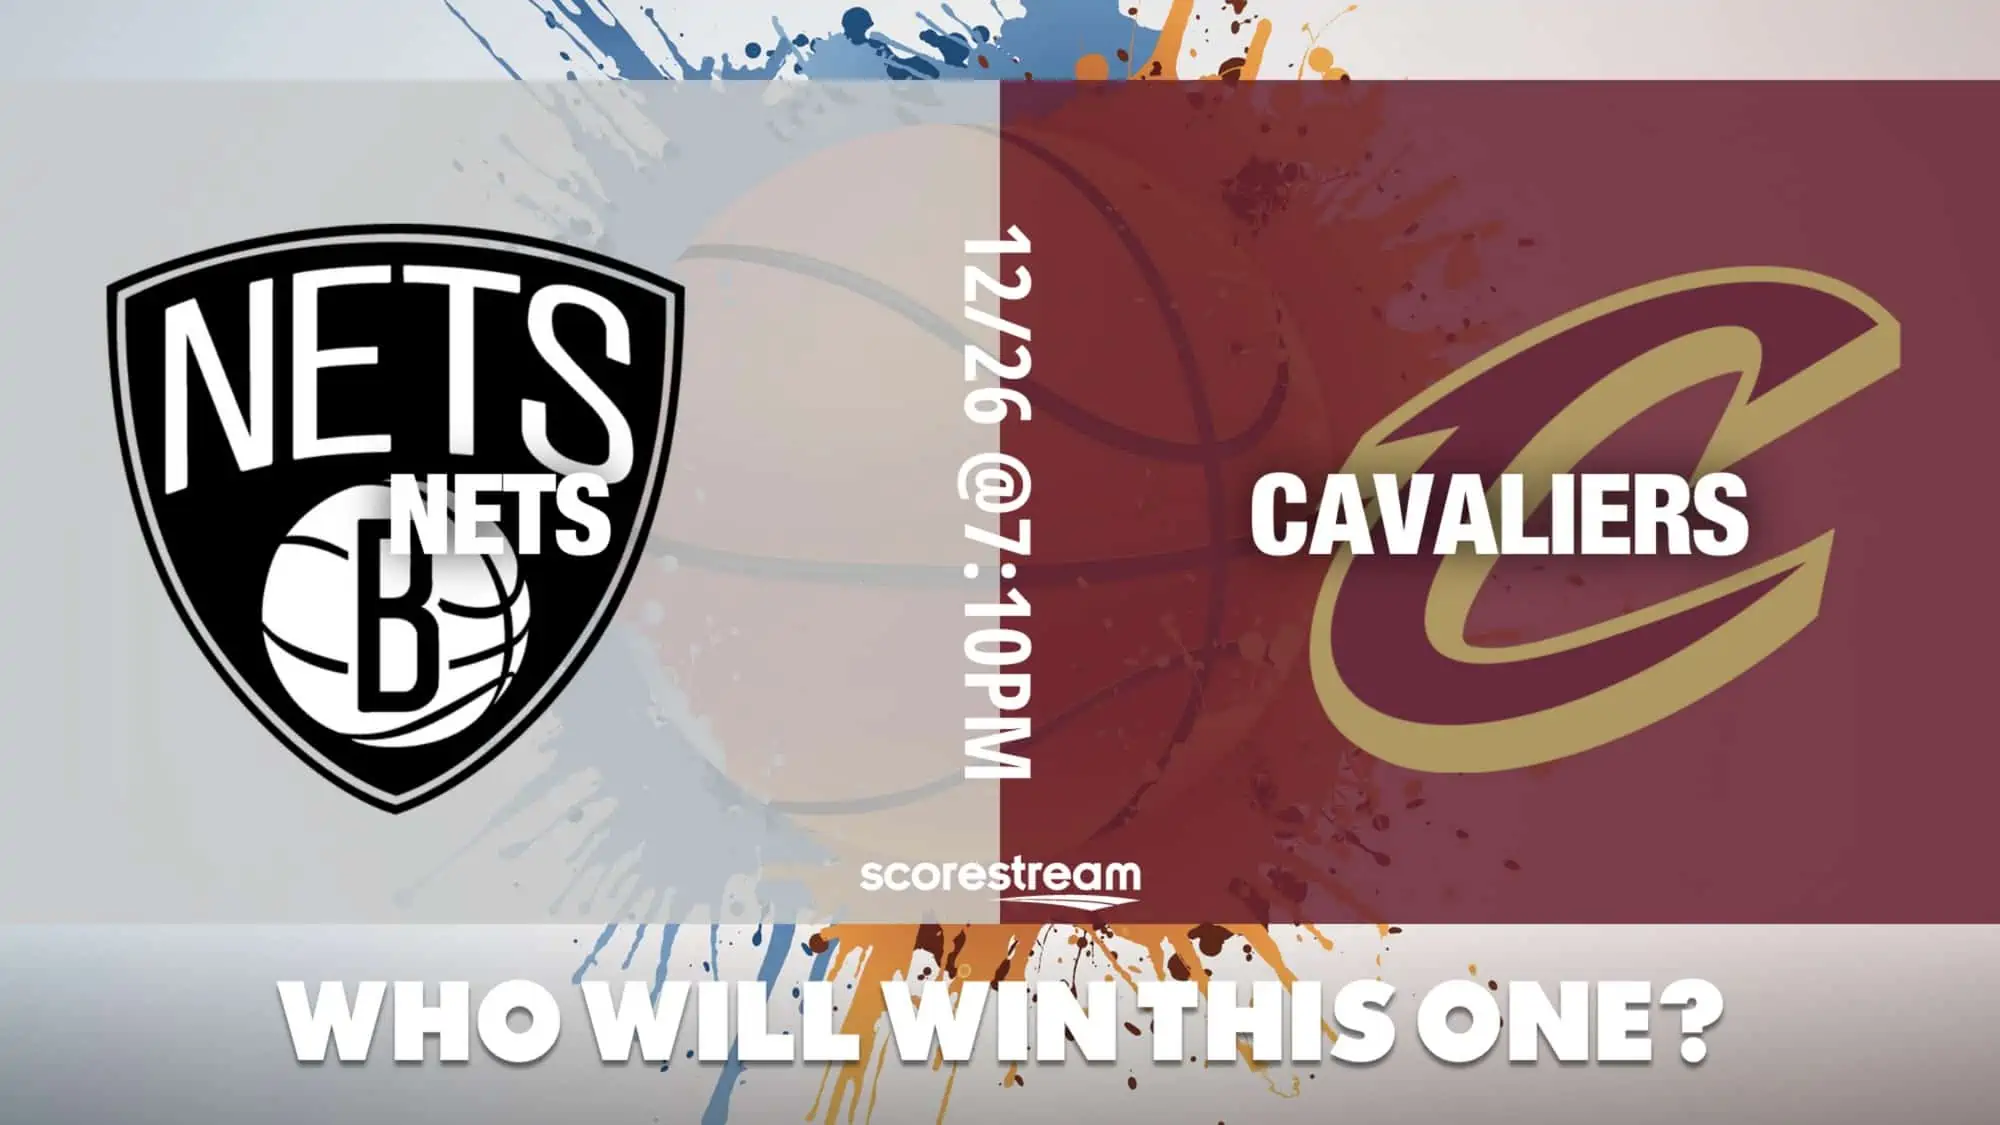 The starting lineups for Brooklyn Nets vs Cleveland Cavaliers NBA game tonight